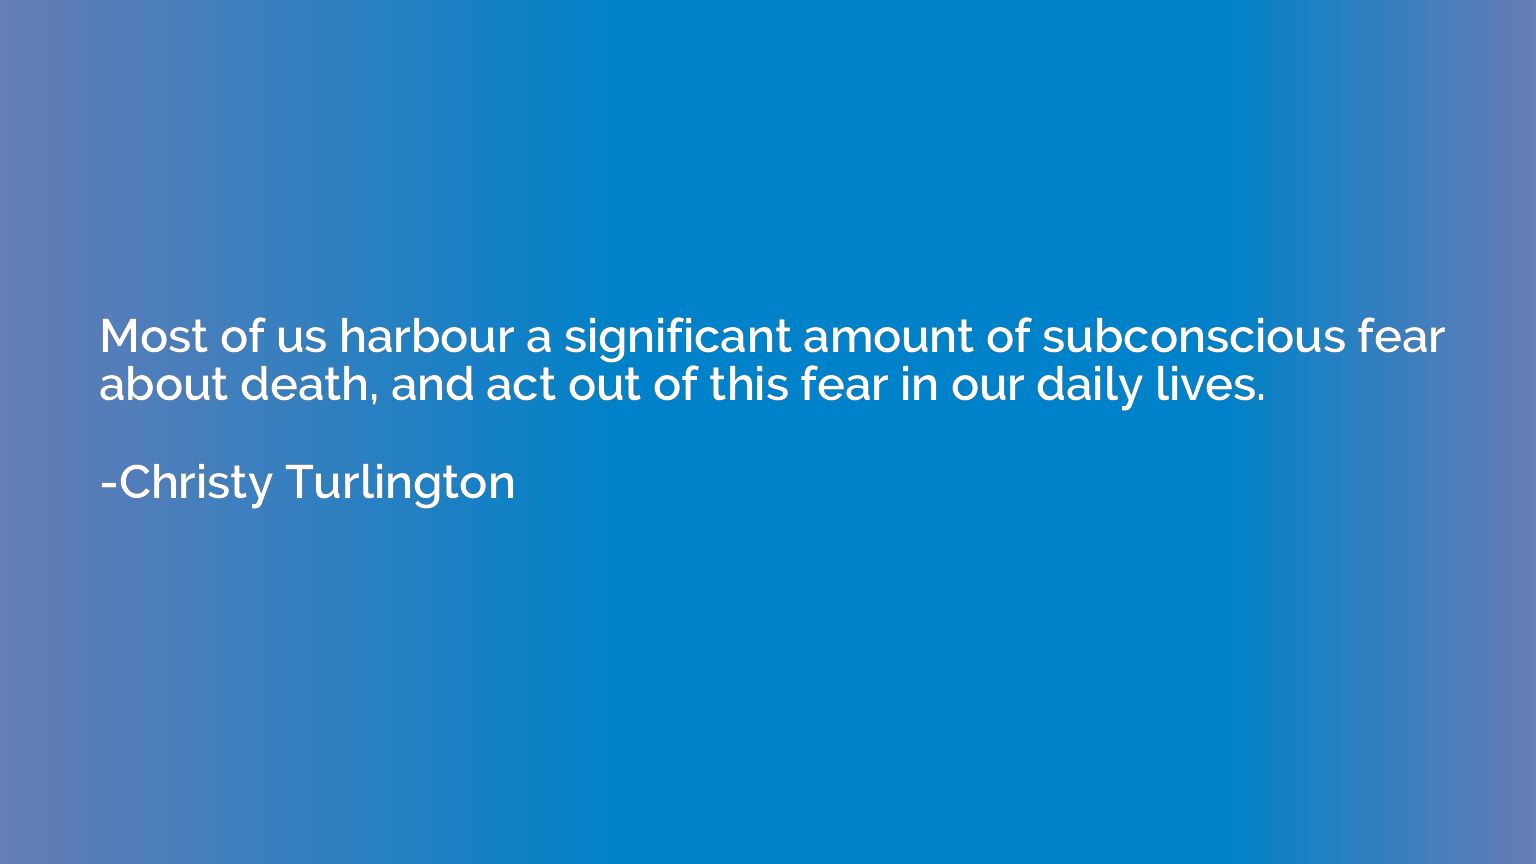 Most of us harbour a significant amount of subconscious fear